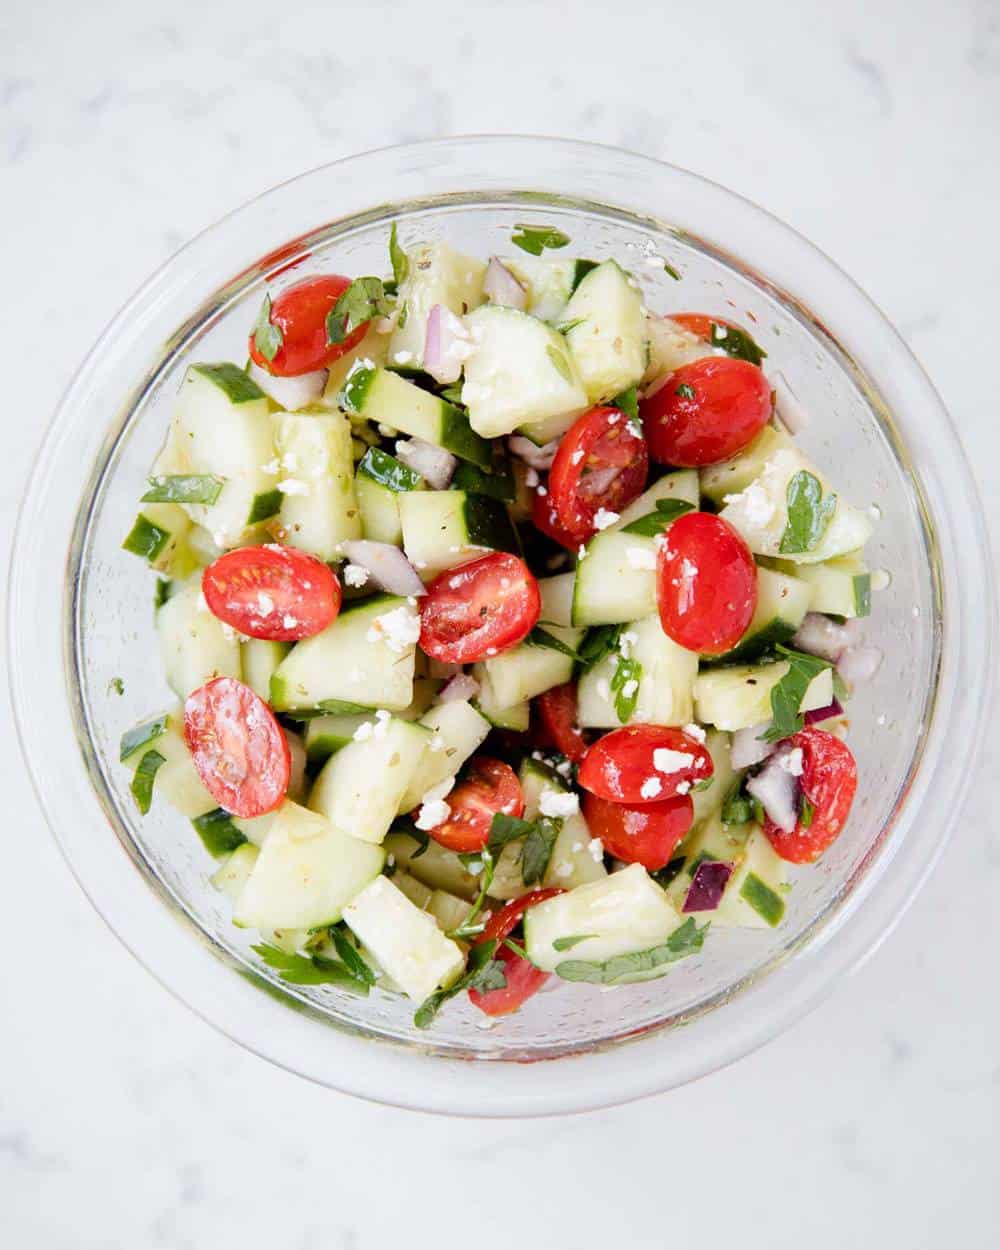 Tomato and cucumber salad in a glass bowl.